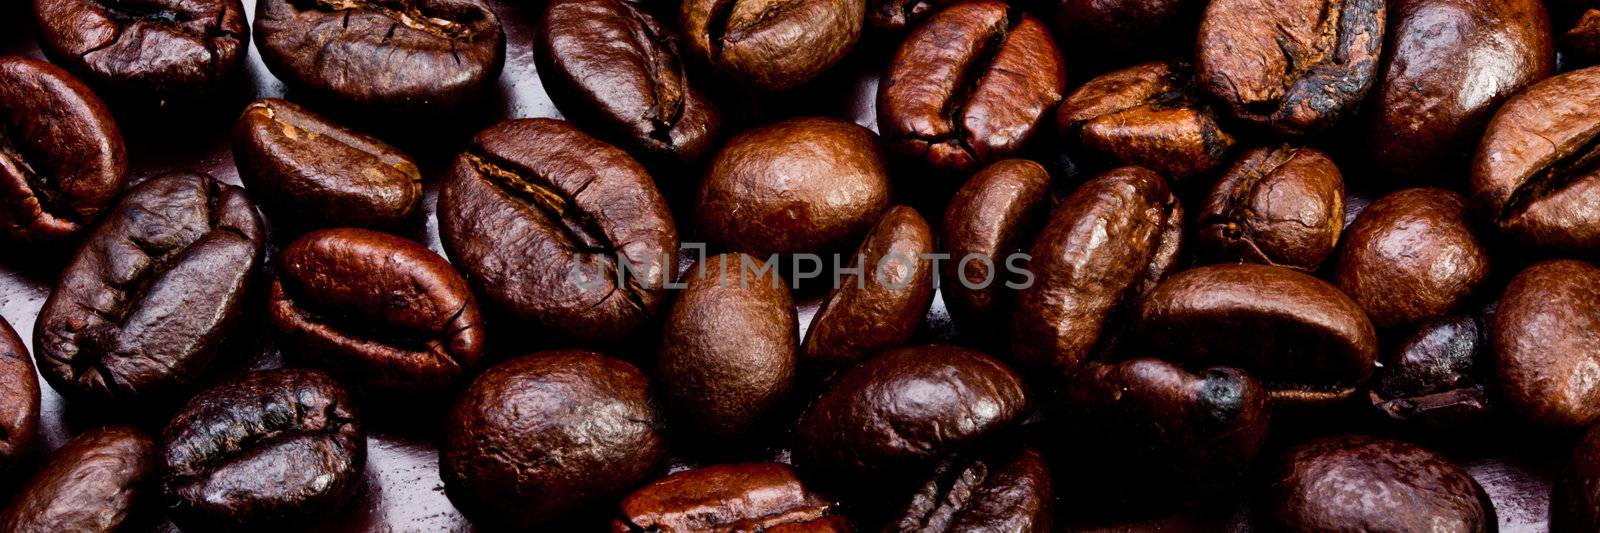 close-up of some coffee beans